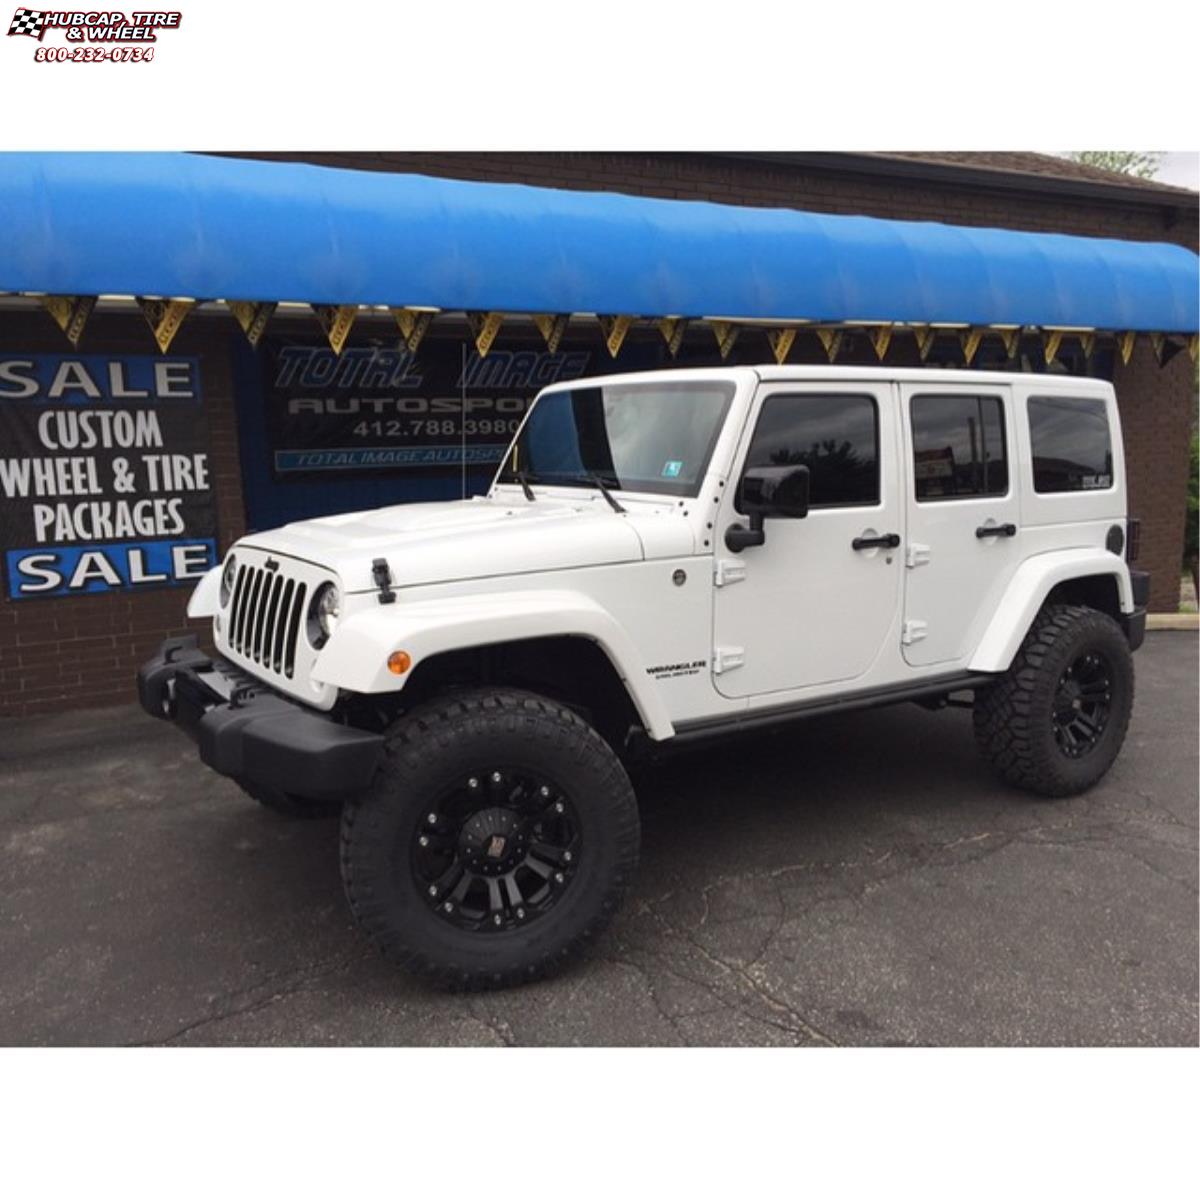 vehicle gallery/jeep wrangler xd series xd778 monster x  Matte Black wheels and rims